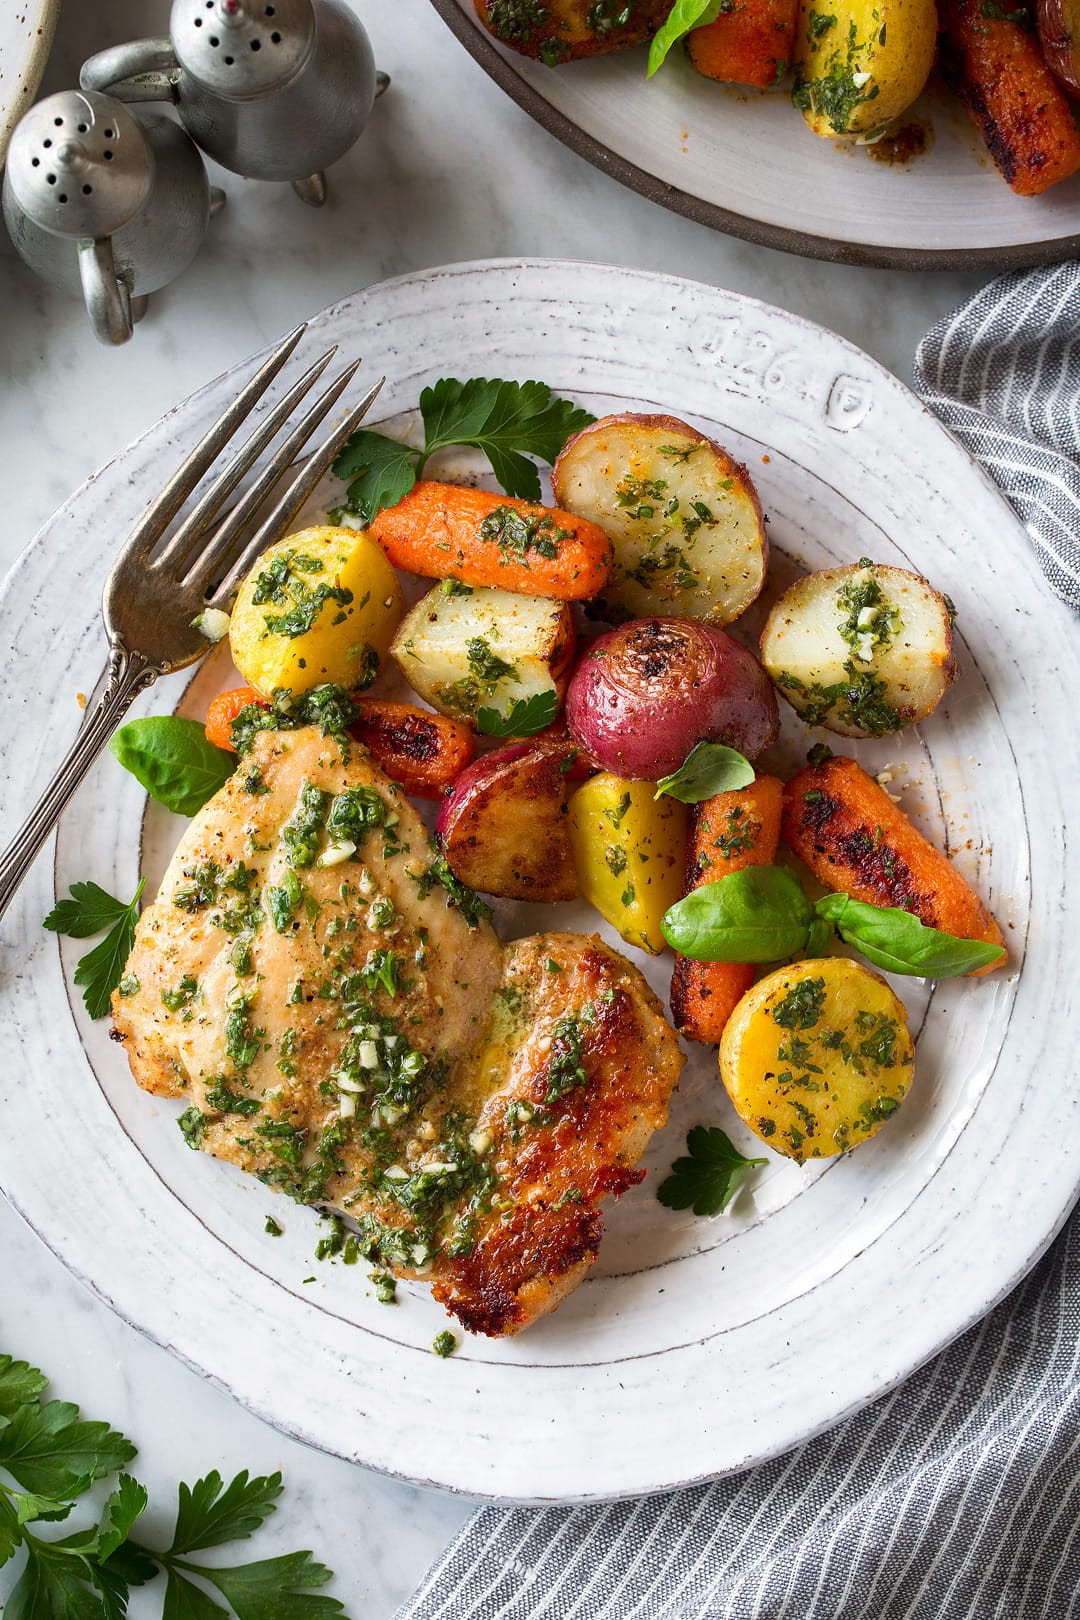 Roasted Chicken Breast And Vegetables
 Roasted Chicken and Veggies with Garlic Herb Vinaigrette